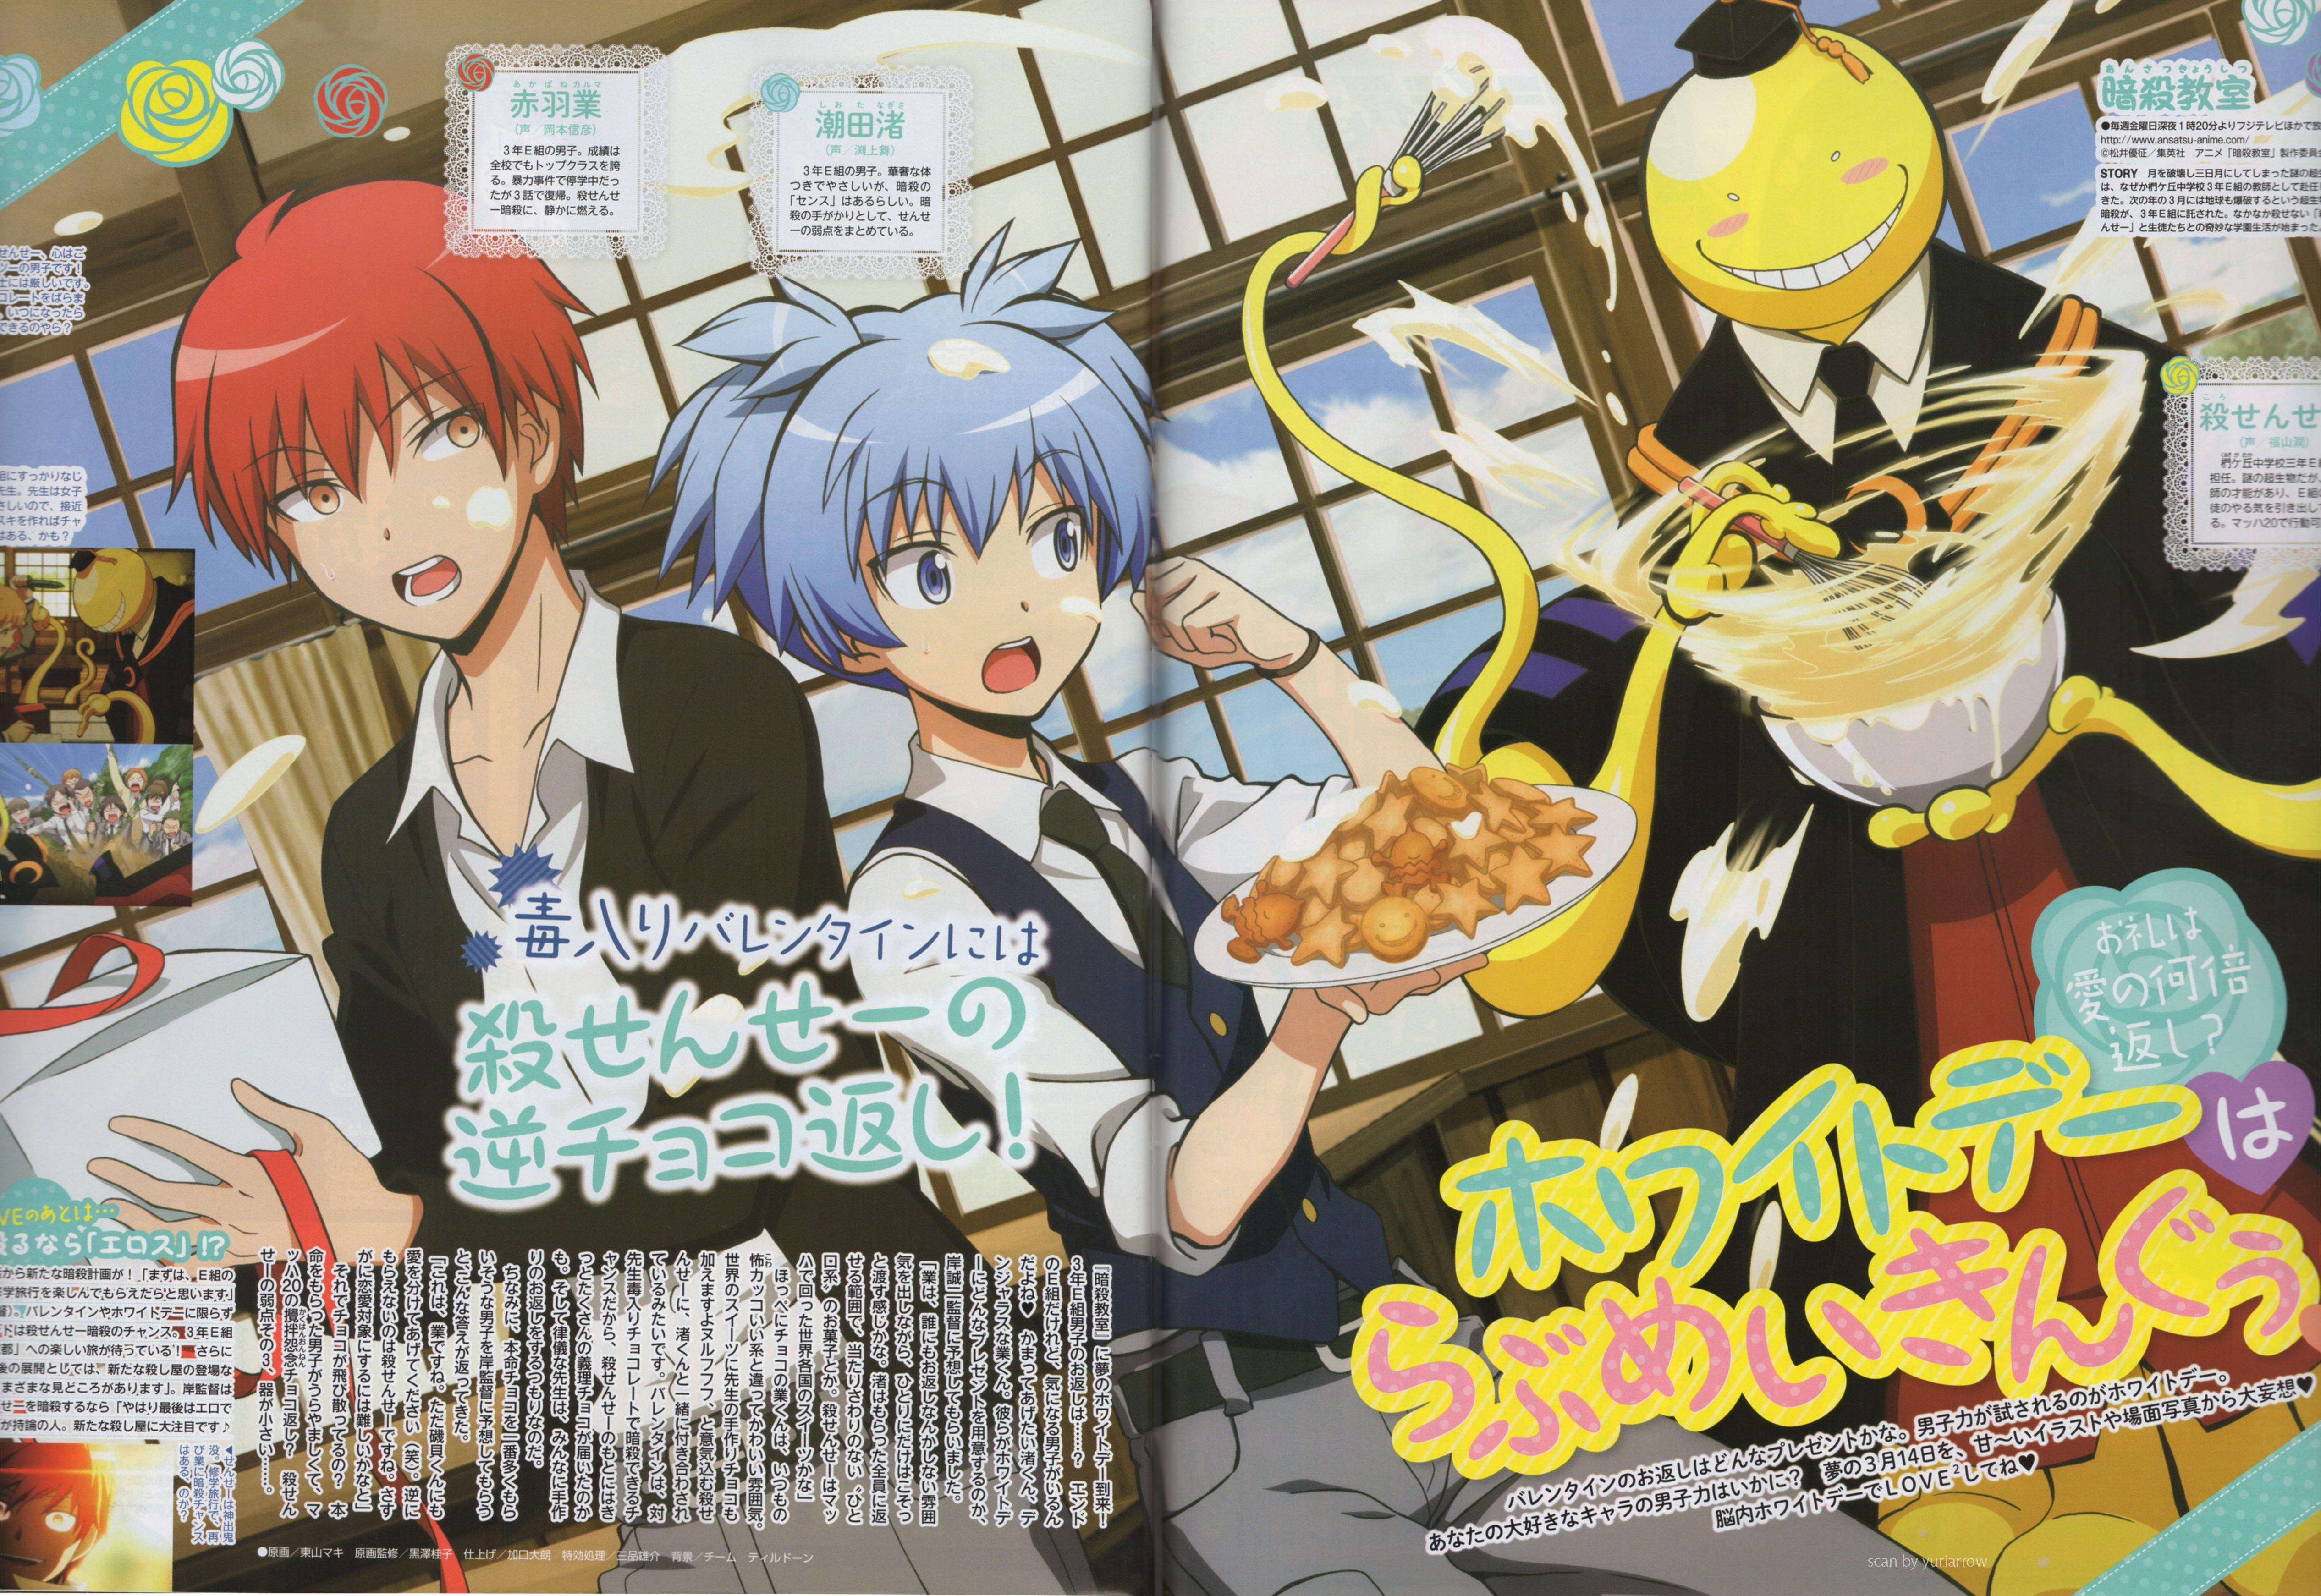 Assassination Classroom and Scan Gallery